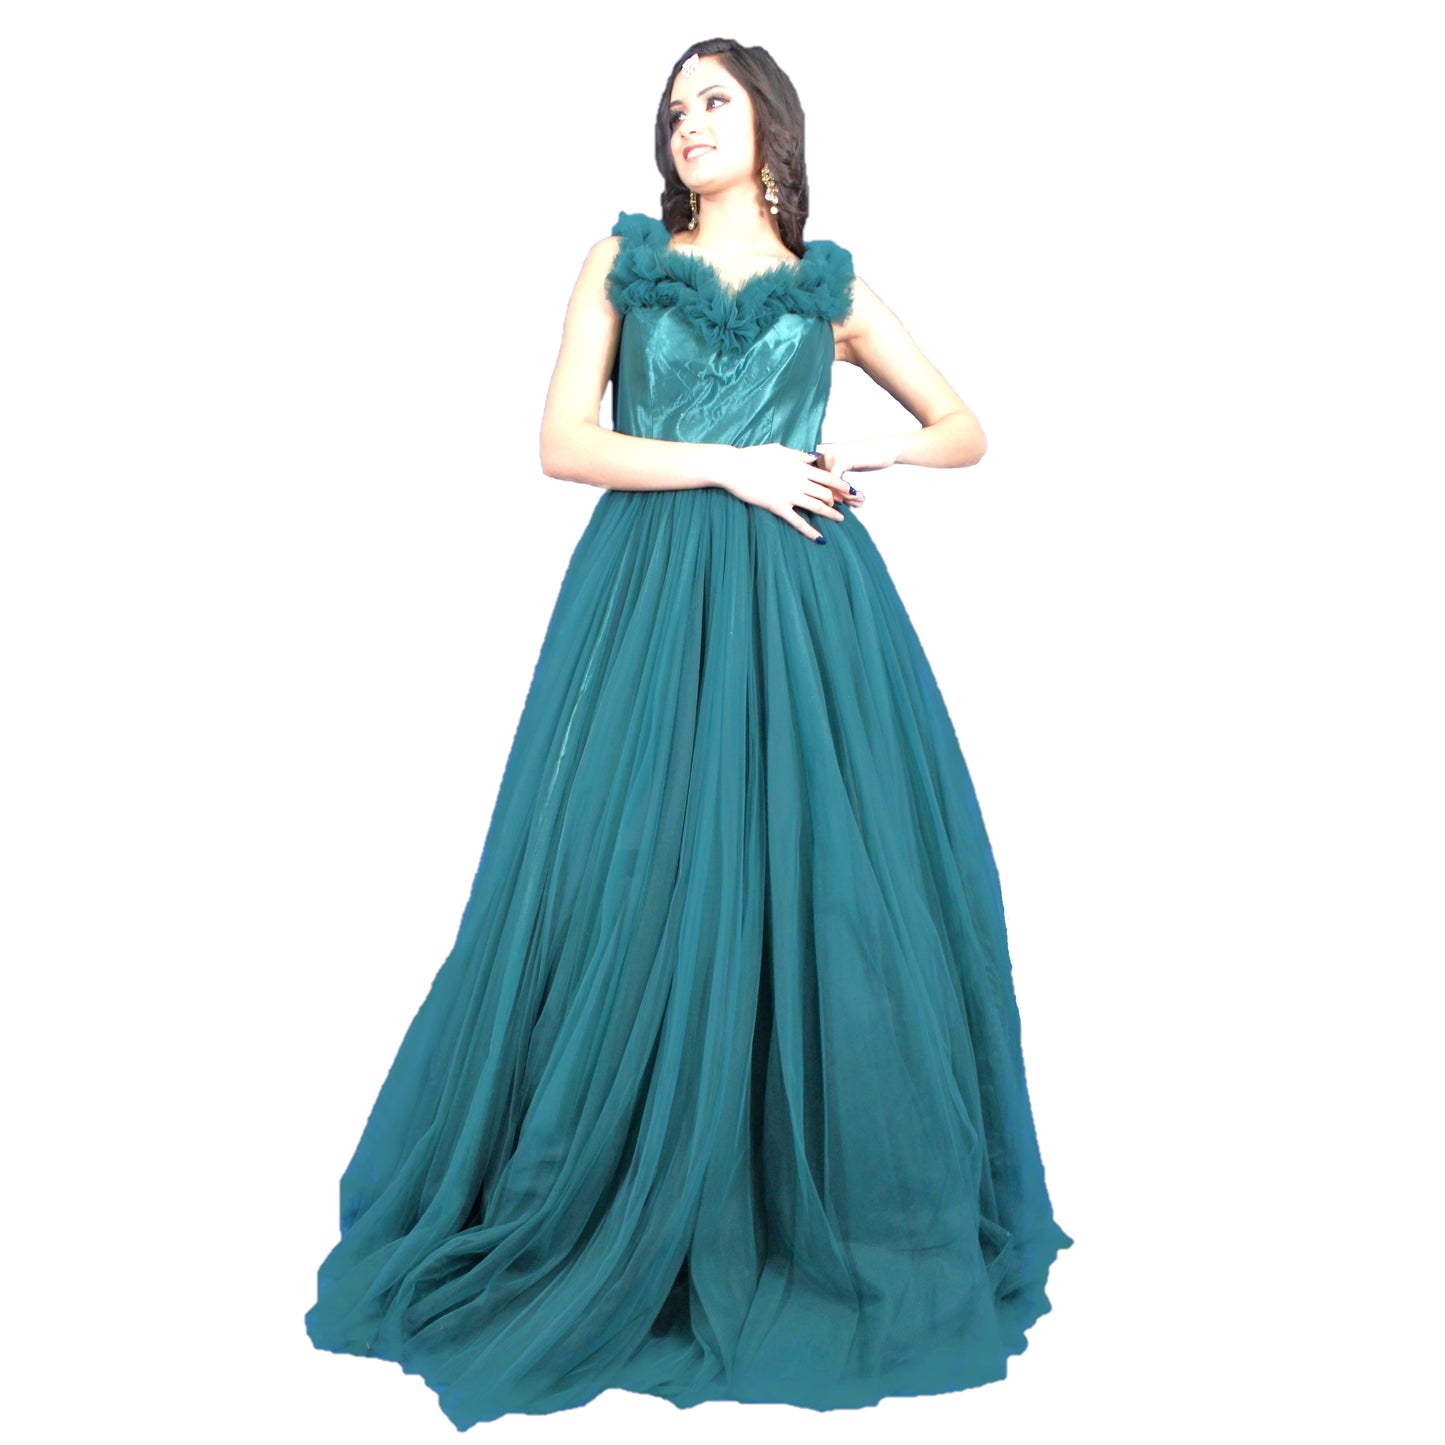 Designer Ball (Princess) Gown - Bottle Green with Floral Net Work